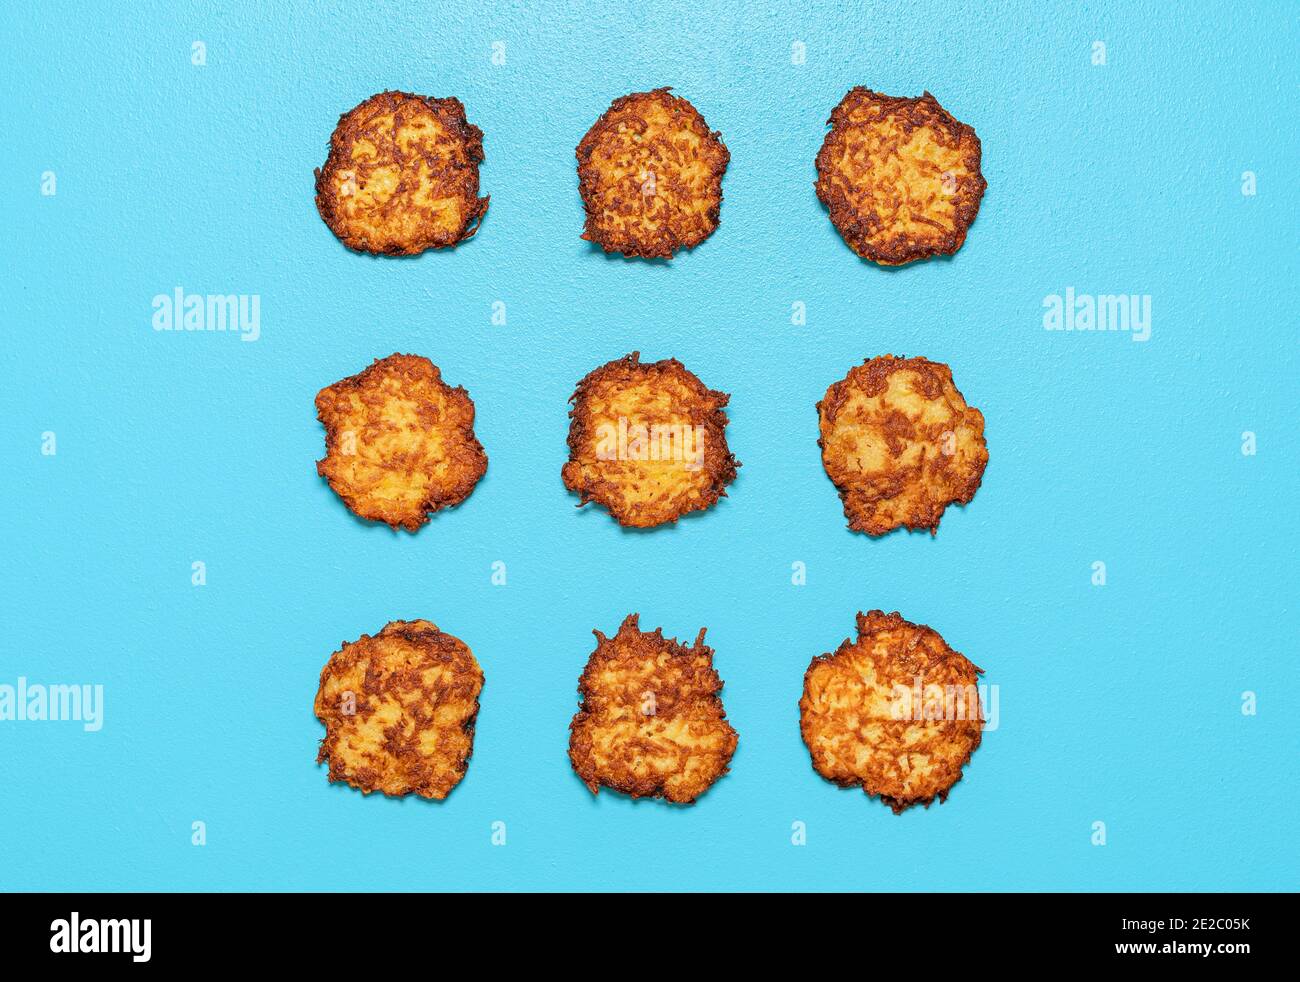 Homemade potato pancakes aligned symmetrically in a square on a blue background. Fried potato pancakes above view. Stock Photo